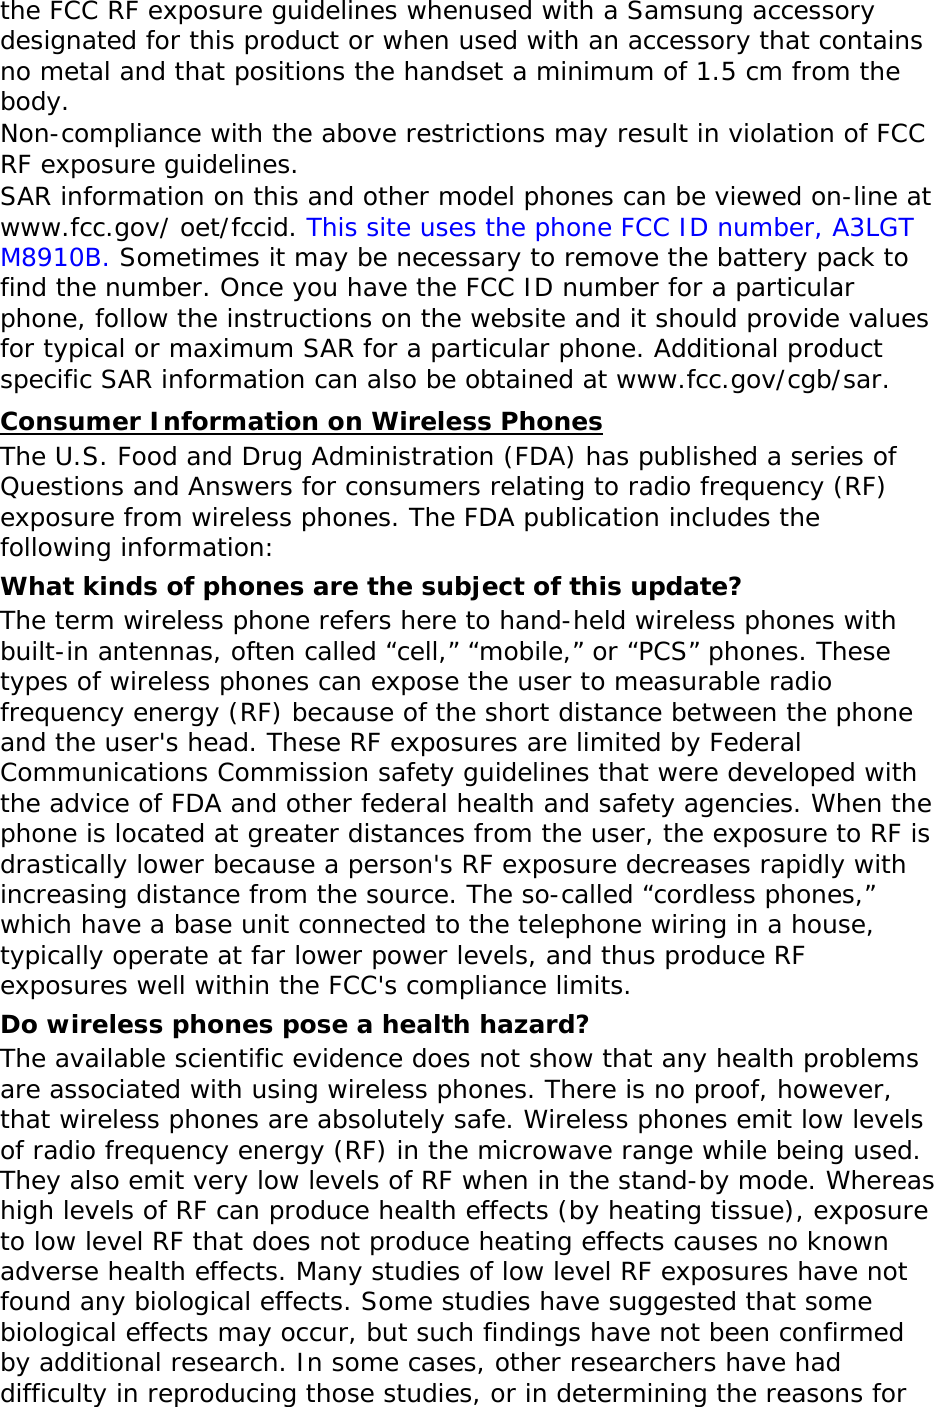 the FCC RF exposure guidelines whenused with a Samsung accessory designated for this product or when used with an accessory that contains no metal and that positions the handset a minimum of 1.5 cm from the body.  Non-compliance with the above restrictions may result in violation of FCC RF exposure guidelines. SAR information on this and other model phones can be viewed on-line at www.fcc.gov/ oet/fccid. This site uses the phone FCC ID number, A3LGTM8910B. Sometimes it may be necessary to remove the battery pack to find the number. Once you have the FCC ID number for a particular phone, follow the instructions on the website and it should provide values for typical or maximum SAR for a particular phone. Additional product specific SAR information can also be obtained at www.fcc.gov/cgb/sar. Consumer Information on Wireless Phones The U.S. Food and Drug Administration (FDA) has published a series of Questions and Answers for consumers relating to radio frequency (RF) exposure from wireless phones. The FDA publication includes the following information: What kinds of phones are the subject of this update? The term wireless phone refers here to hand-held wireless phones with built-in antennas, often called “cell,” “mobile,” or “PCS” phones. These types of wireless phones can expose the user to measurable radio frequency energy (RF) because of the short distance between the phone and the user&apos;s head. These RF exposures are limited by Federal Communications Commission safety guidelines that were developed with the advice of FDA and other federal health and safety agencies. When the phone is located at greater distances from the user, the exposure to RF is drastically lower because a person&apos;s RF exposure decreases rapidly with increasing distance from the source. The so-called “cordless phones,” which have a base unit connected to the telephone wiring in a house, typically operate at far lower power levels, and thus produce RF exposures well within the FCC&apos;s compliance limits. Do wireless phones pose a health hazard? The available scientific evidence does not show that any health problems are associated with using wireless phones. There is no proof, however, that wireless phones are absolutely safe. Wireless phones emit low levels of radio frequency energy (RF) in the microwave range while being used. They also emit very low levels of RF when in the stand-by mode. Whereas high levels of RF can produce health effects (by heating tissue), exposure to low level RF that does not produce heating effects causes no known adverse health effects. Many studies of low level RF exposures have not found any biological effects. Some studies have suggested that some biological effects may occur, but such findings have not been confirmed by additional research. In some cases, other researchers have had difficulty in reproducing those studies, or in determining the reasons for 